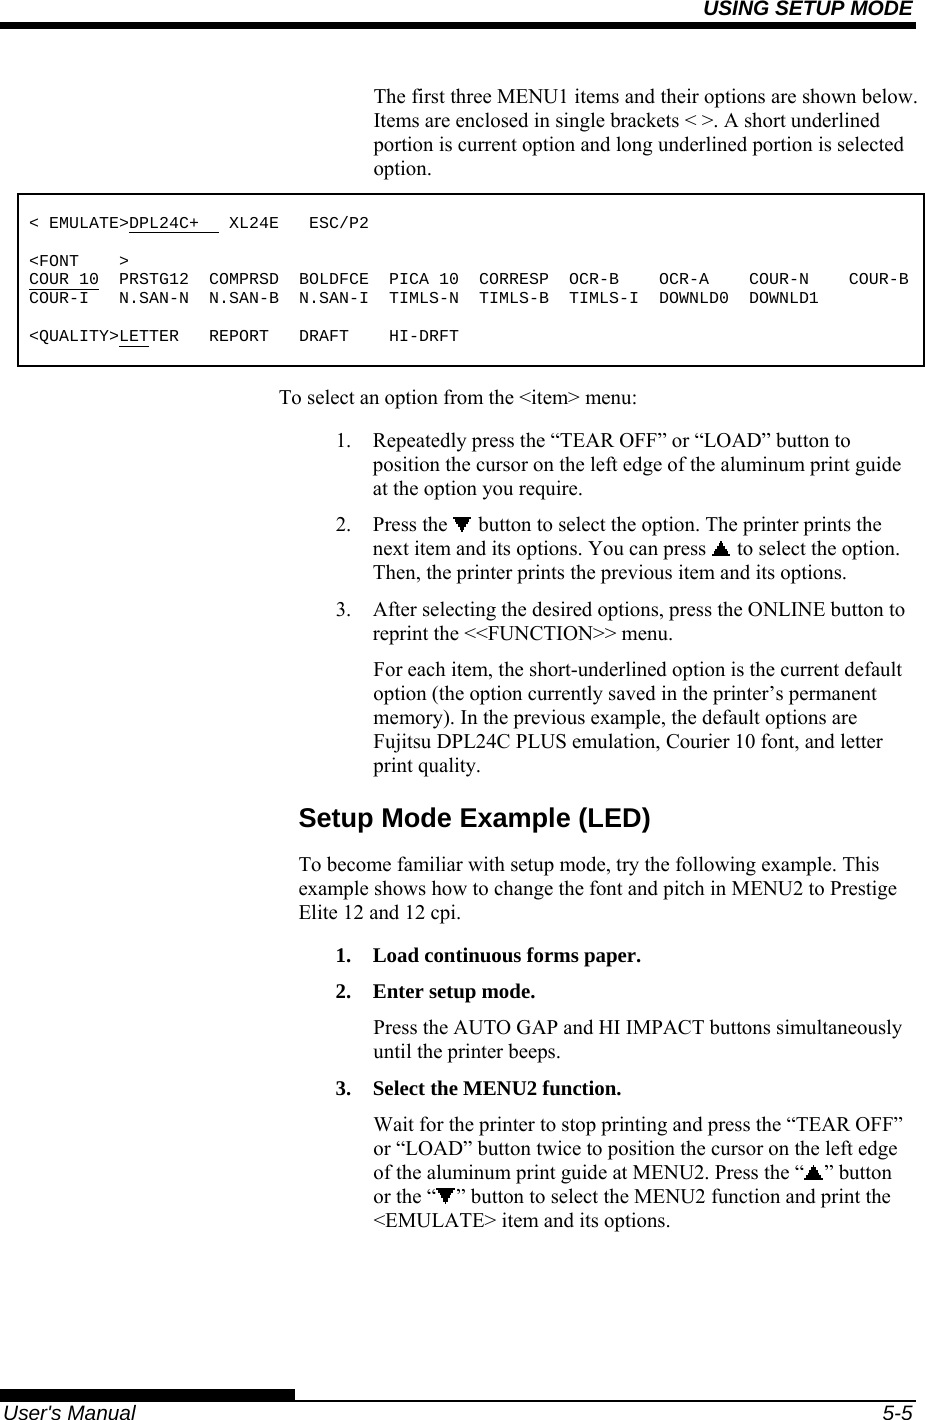 USING SETUP MODE   User&apos;s Manual  5-5 The first three MENU1 items and their options are shown below. Items are enclosed in single brackets &lt; &gt;. A short underlined portion is current option and long underlined portion is selected option.  &lt; EMULATE&gt;DPL24C+   XL24E   ESC/P2  &lt;FONT    &gt; COUR 10  PRSTG12  COMPRSD  BOLDFCE  PICA 10  CORRESP  OCR-B    OCR-A    COUR-N    COUR-BCOUR-I   N.SAN-N  N.SAN-B  N.SAN-I  TIMLS-N  TIMLS-B  TIMLS-I  DOWNLD0  DOWNLD1  &lt;QUALITY&gt;LETTER   REPORT   DRAFT    HI-DRFT To select an option from the &lt;item&gt; menu: 1.  Repeatedly press the “TEAR OFF” or “LOAD” button to position the cursor on the left edge of the aluminum print guide at the option you require. 2. Press the   button to select the option. The printer prints the next item and its options. You can press   to select the option.  Then, the printer prints the previous item and its options. 3.  After selecting the desired options, press the ONLINE button to reprint the &lt;&lt;FUNCTION&gt;&gt; menu. For each item, the short-underlined option is the current default option (the option currently saved in the printer’s permanent memory). In the previous example, the default options are Fujitsu DPL24C PLUS emulation, Courier 10 font, and letter print quality. Setup Mode Example (LED) To become familiar with setup mode, try the following example. This example shows how to change the font and pitch in MENU2 to Prestige Elite 12 and 12 cpi. 1.  Load continuous forms paper. 2.  Enter setup mode. Press the AUTO GAP and HI IMPACT buttons simultaneously until the printer beeps. 3.  Select the MENU2 function. Wait for the printer to stop printing and press the “TEAR OFF” or “LOAD” button twice to position the cursor on the left edge of the aluminum print guide at MENU2. Press the “ ” button or the “ ” button to select the MENU2 function and print the &lt;EMULATE&gt; item and its options.  